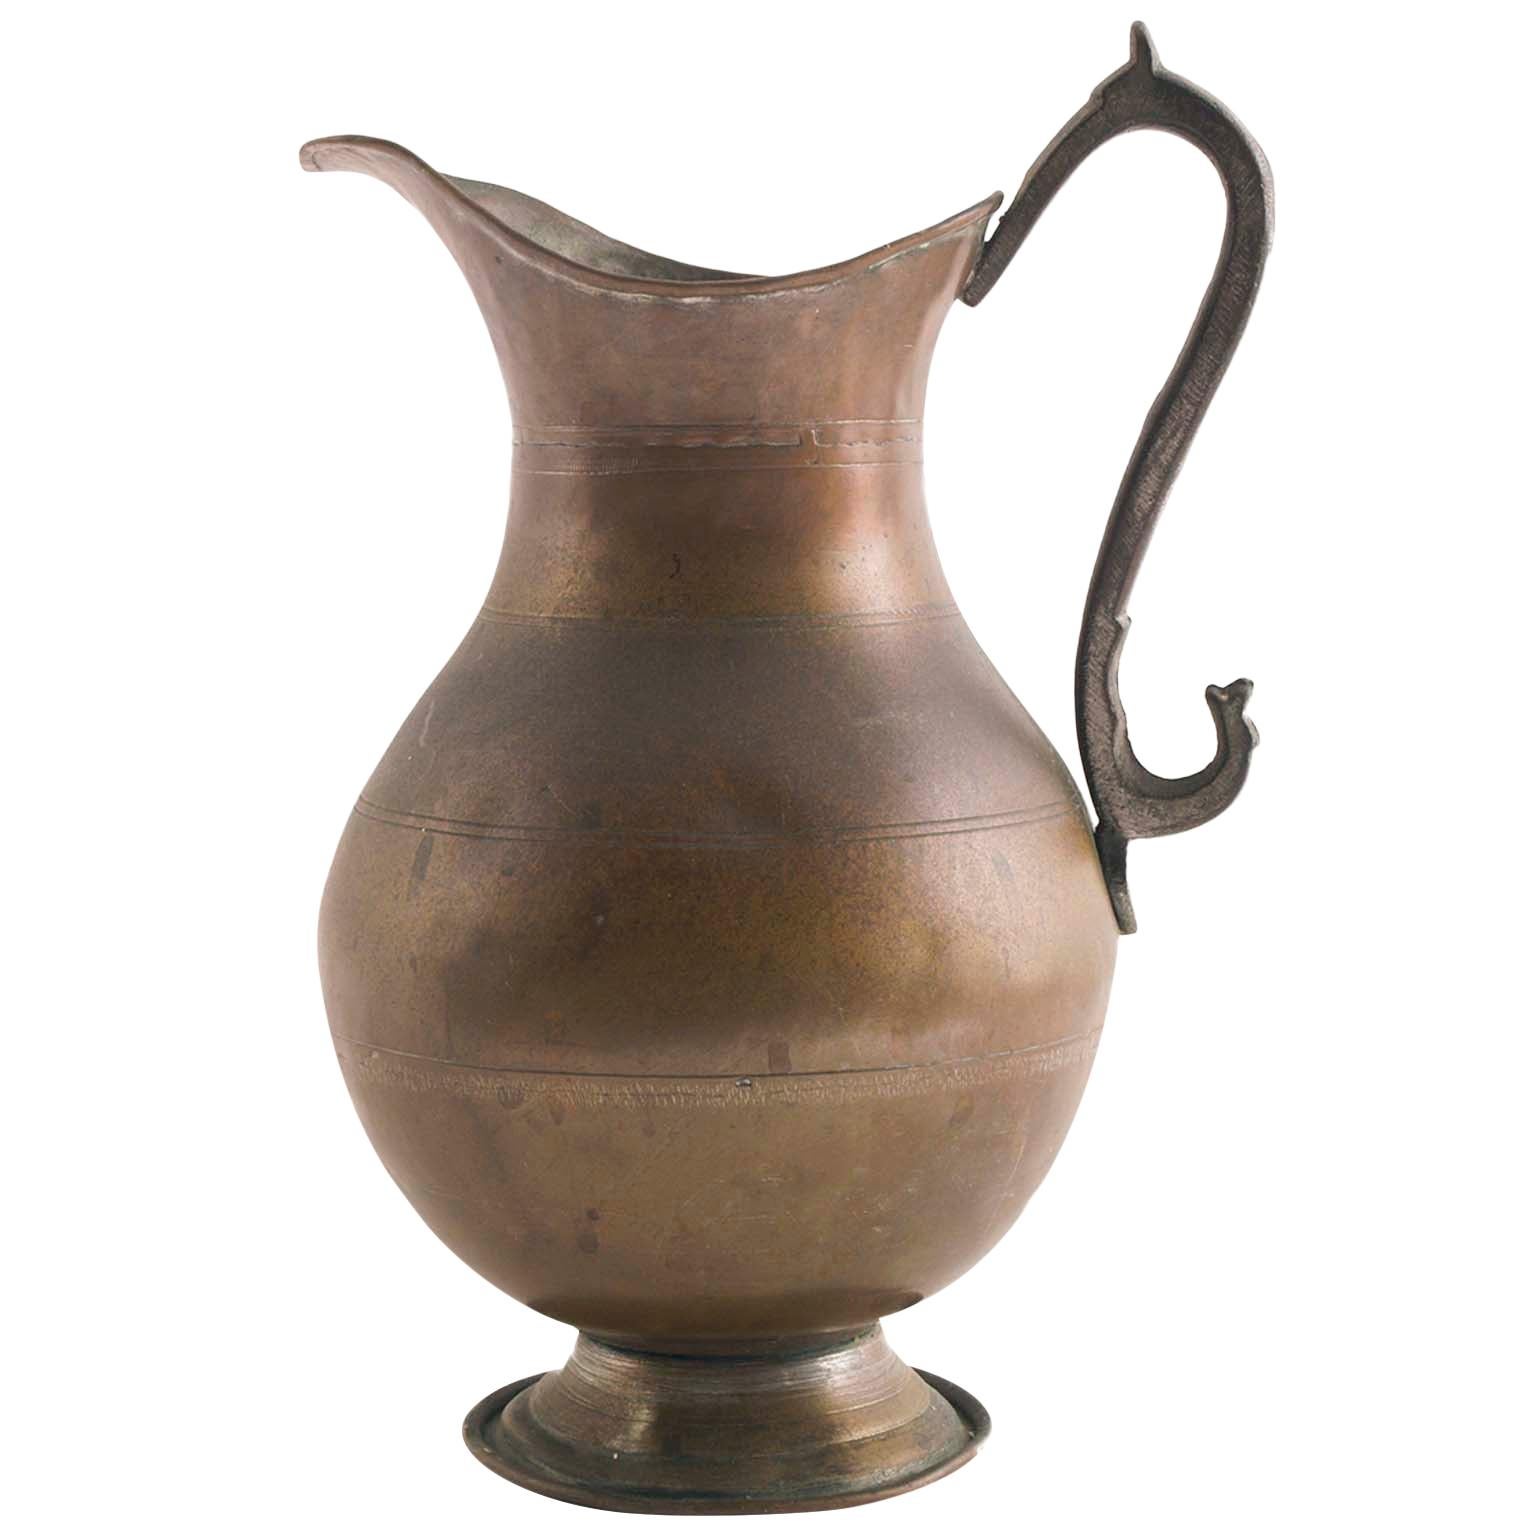 Antique water jug or pitcher, from the Ottoman Empire, handmade in heavy copper, hammered, riveted and originally plated with a silver finish, now worn, which gives an acquired rustic quality that only time and use can transmit.
Belonging to the